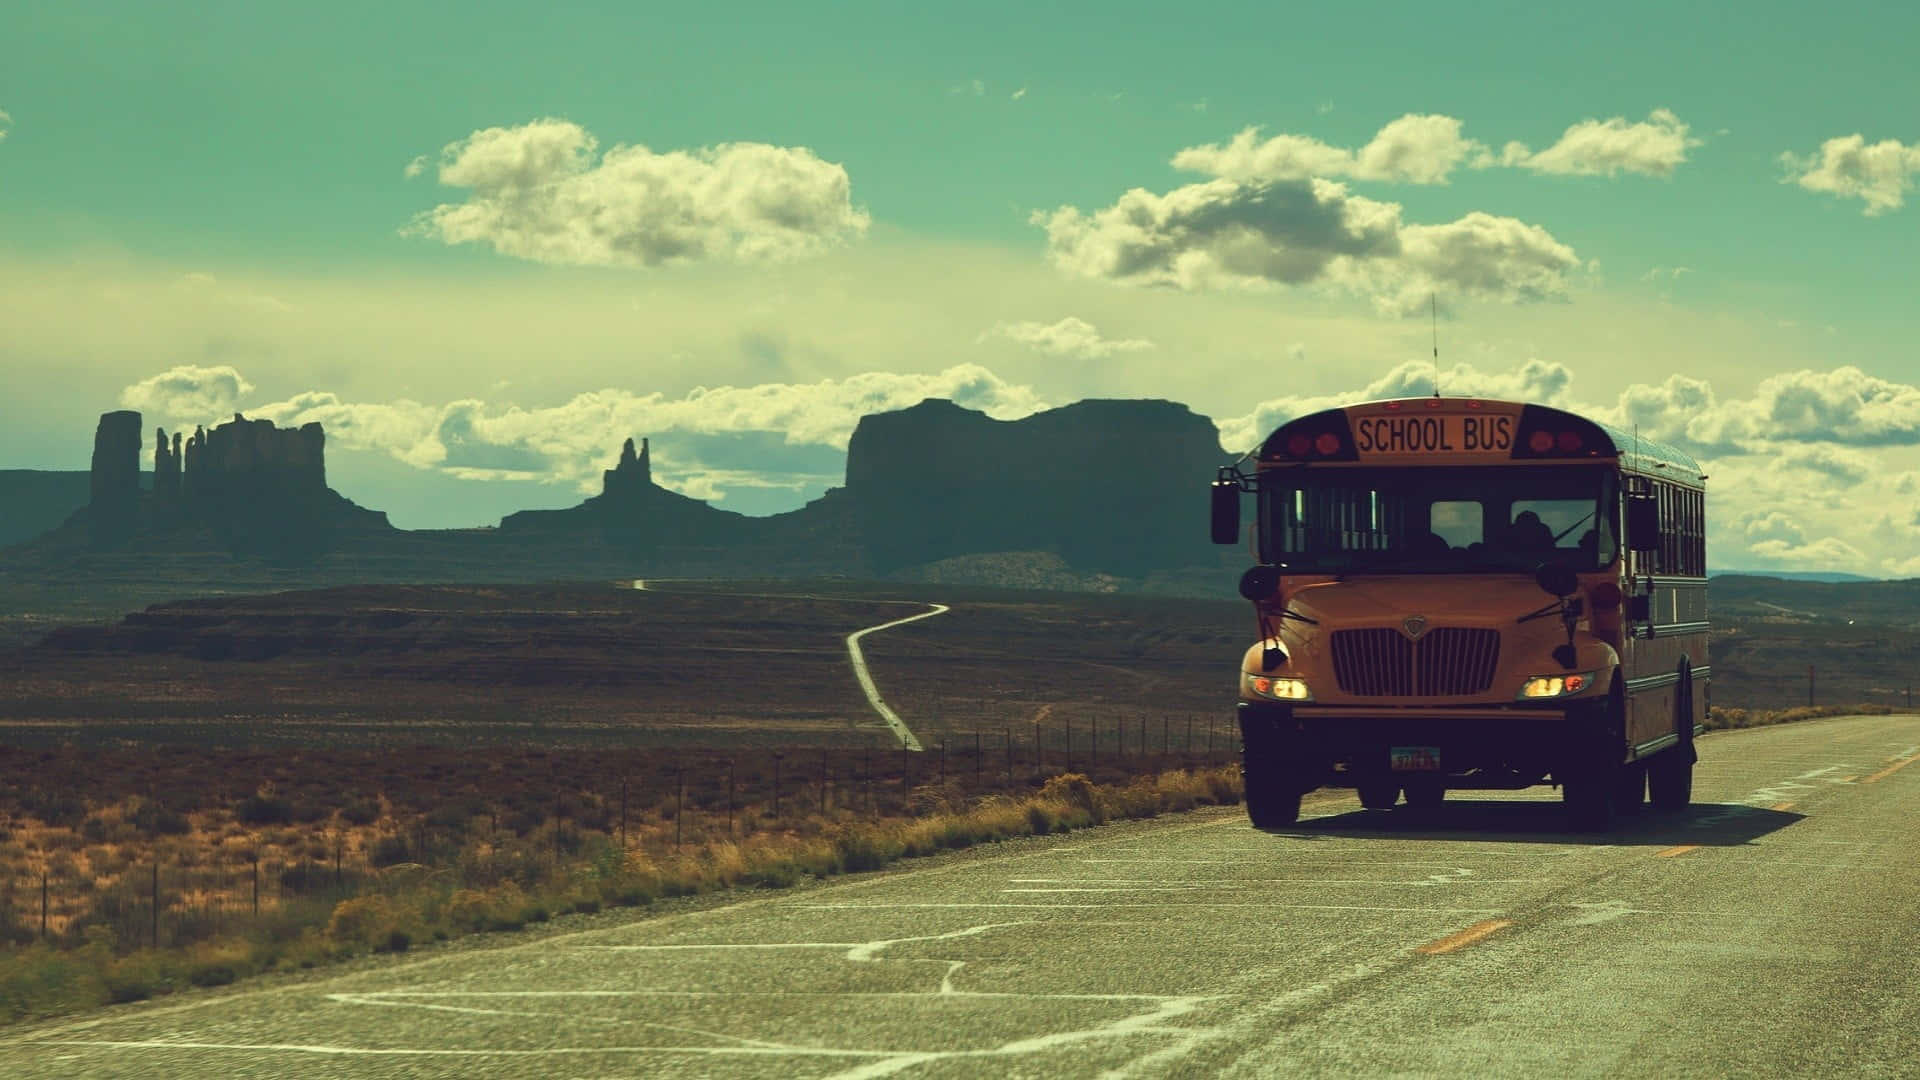 A bright yellow school bus parked outdoors on a sunny day Wallpaper